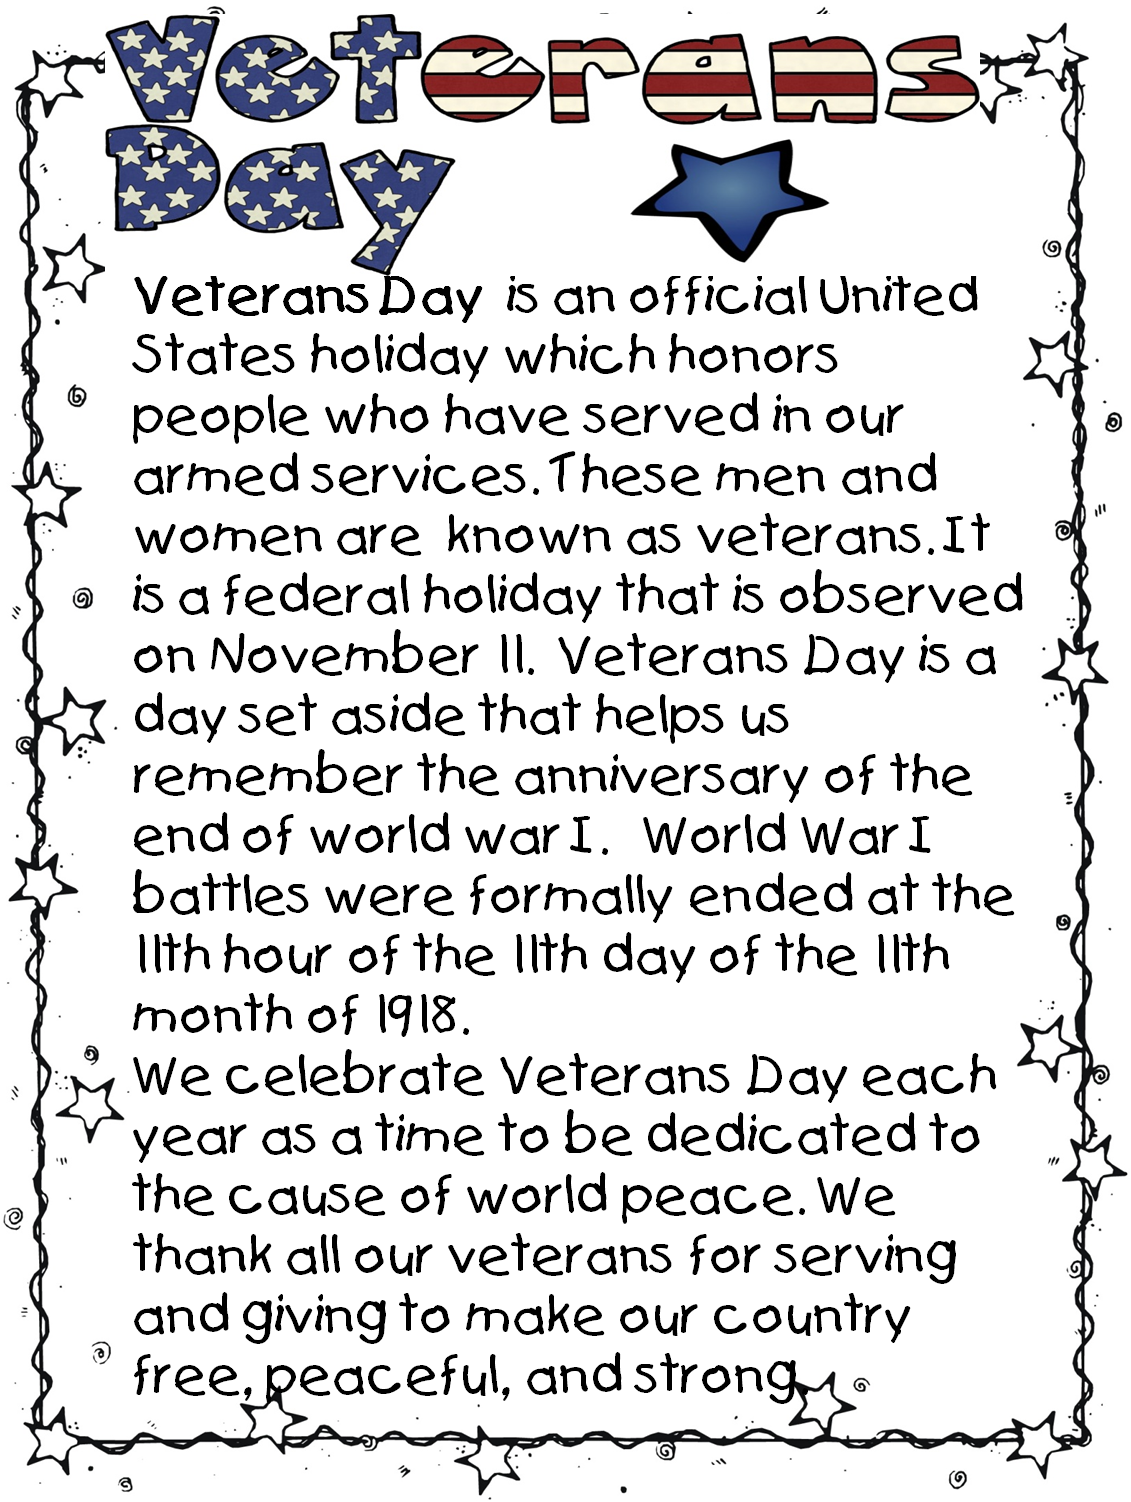 Why are veterans important essay